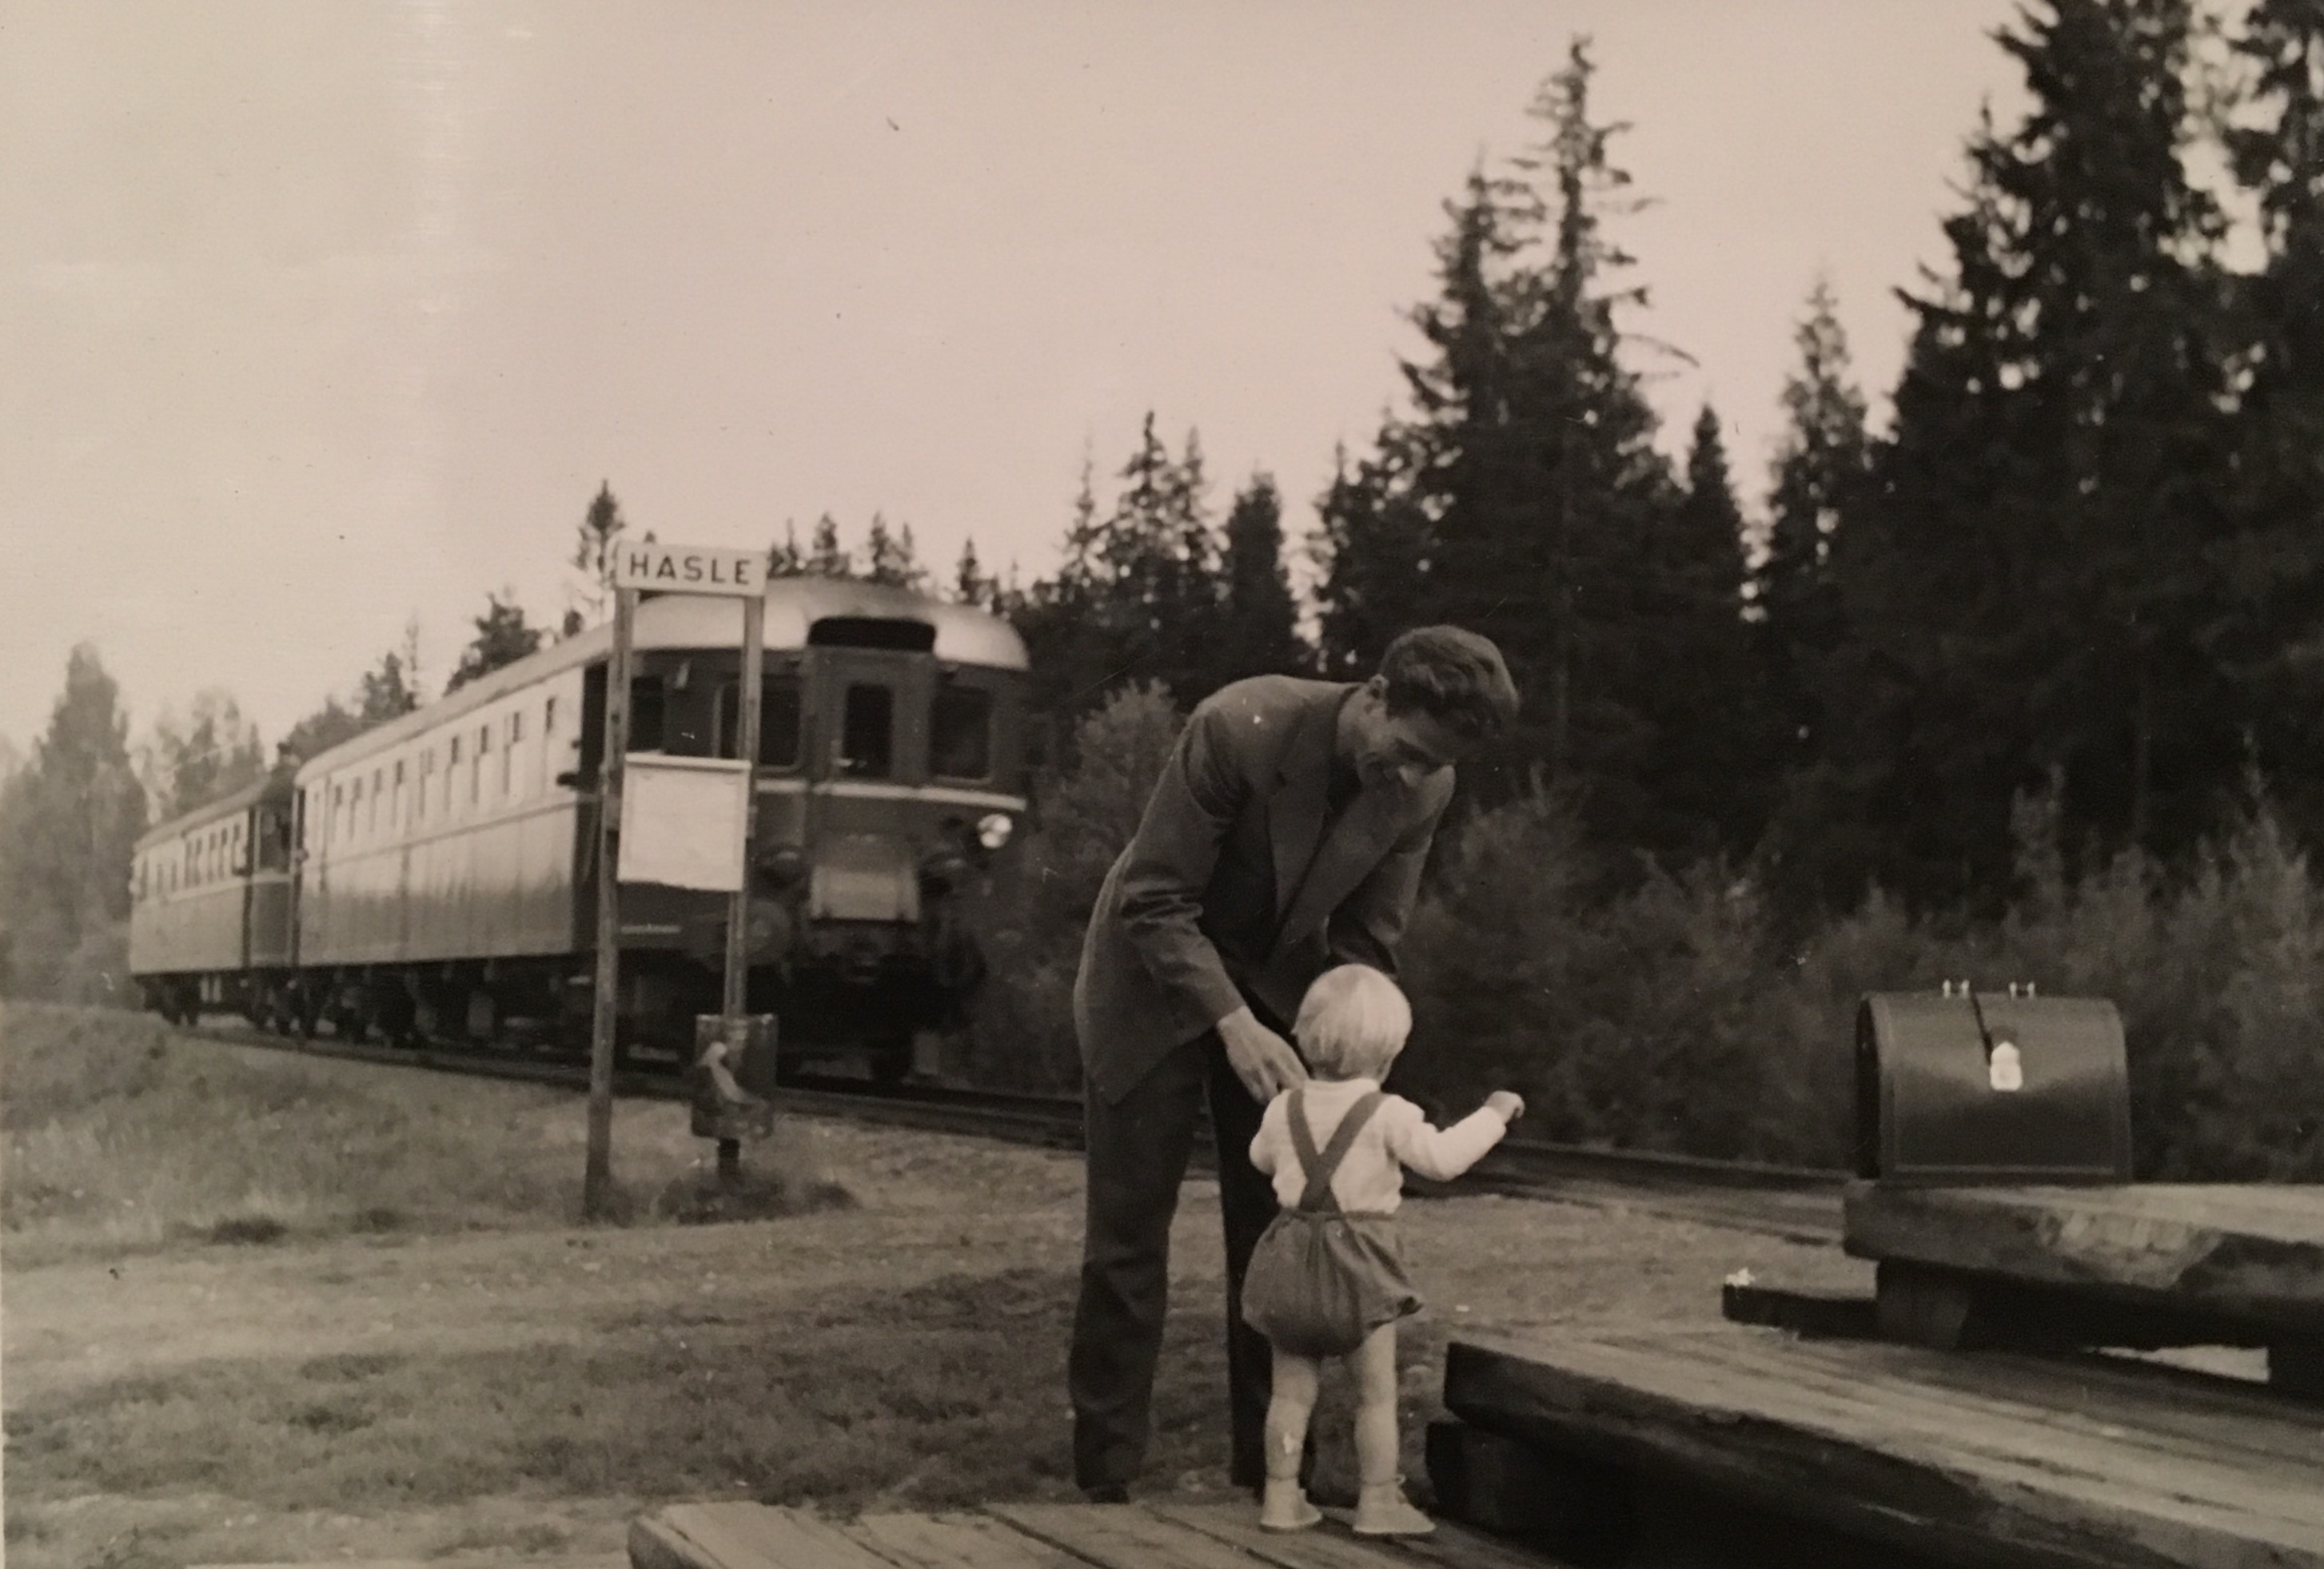 Waiting for the train (Hasle in Norway),and good bye to uncle in 1957!